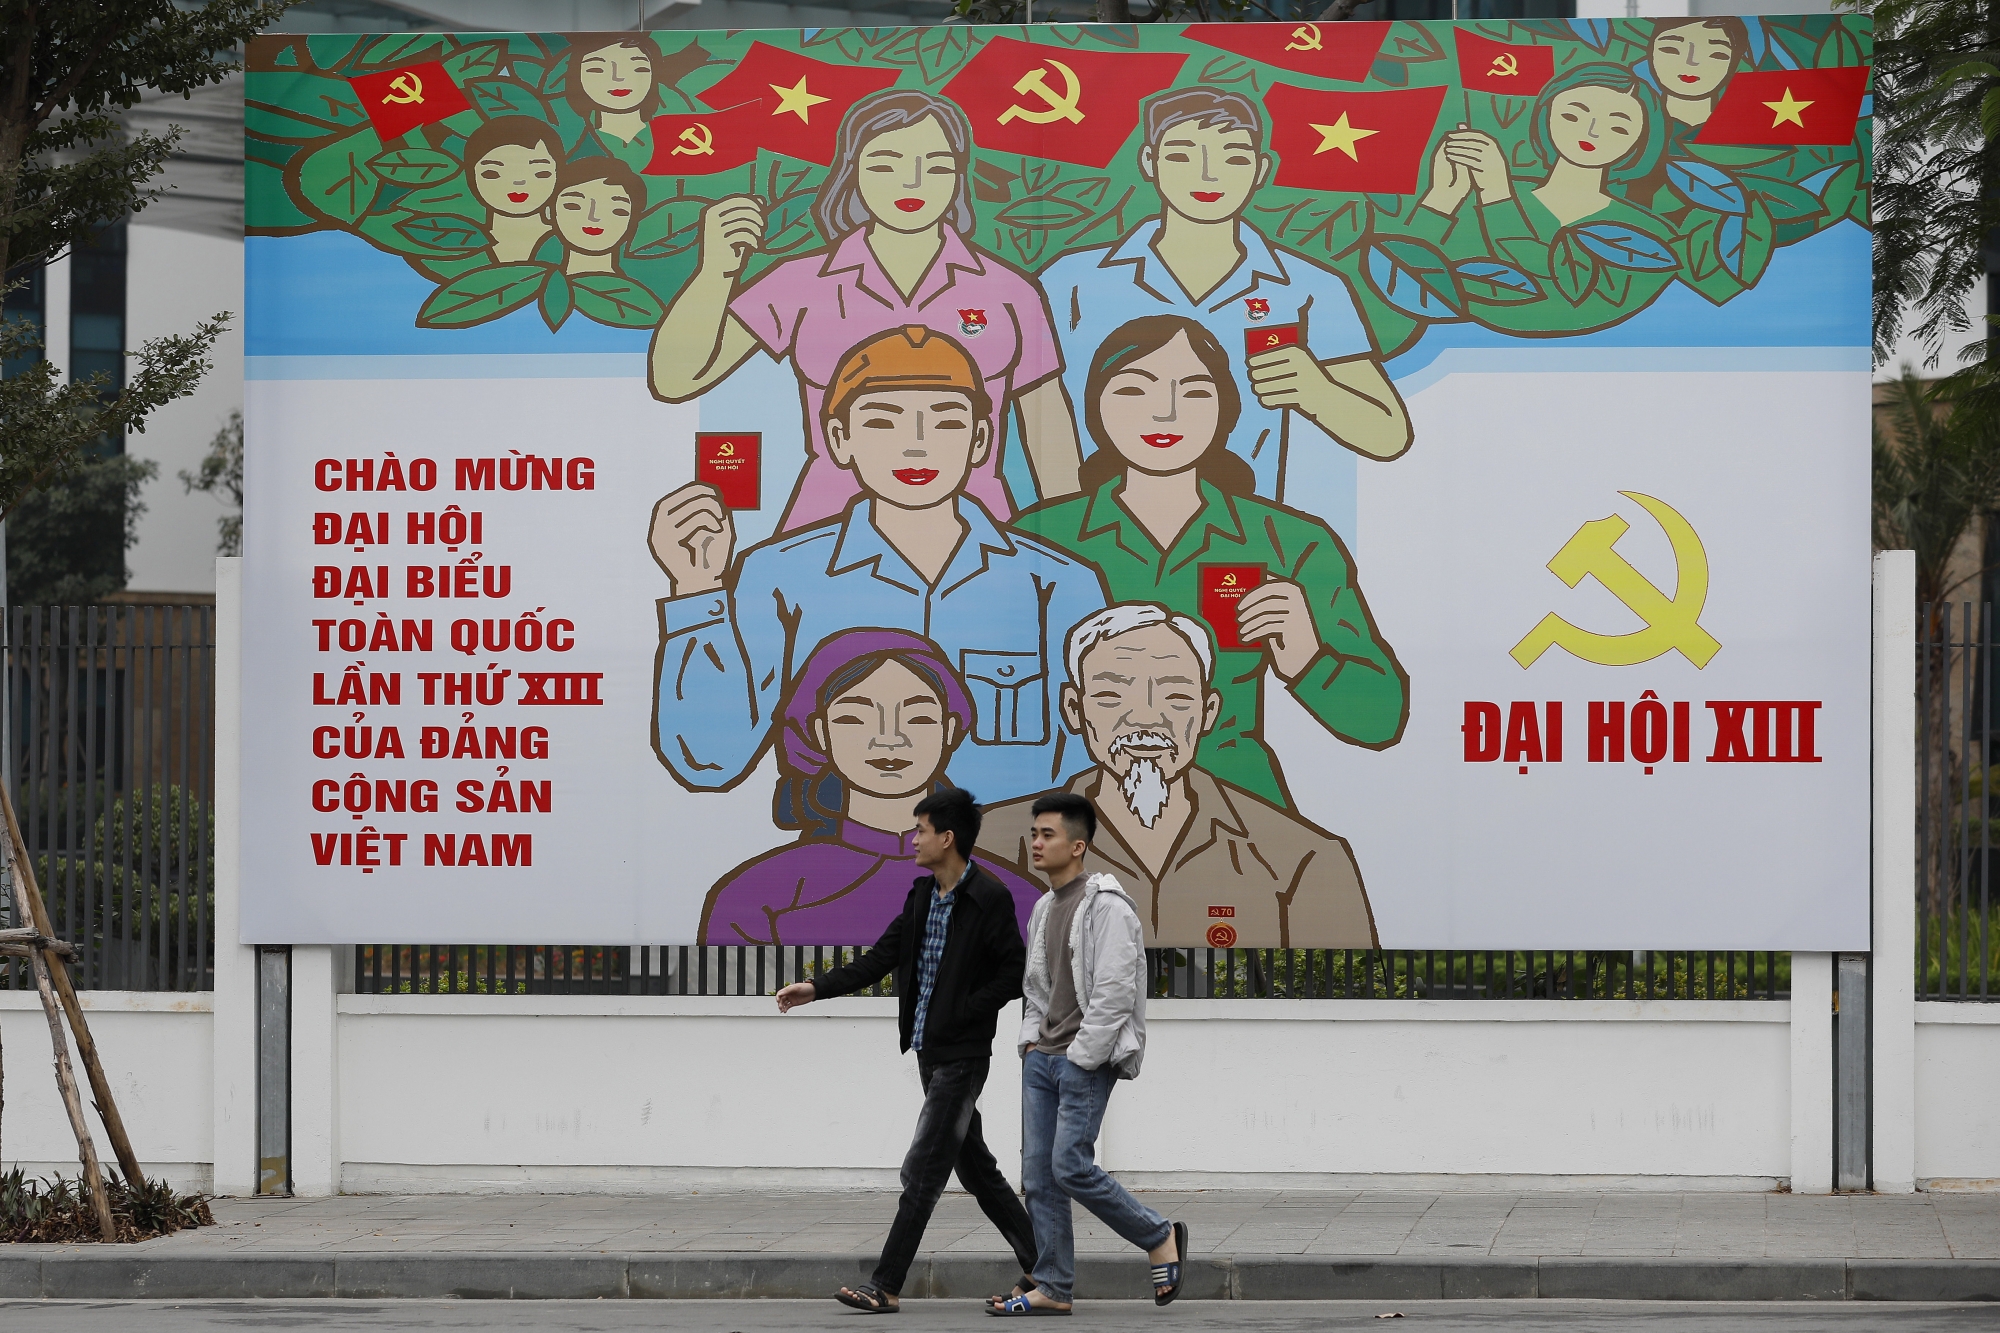 epa08963565 Two men walk past a billboard for the 13th National Congress of Vietnam's Communist Party (VCP), in Hanoi, Vietnam, 25 January 2021. The VCP's 13th congress, which runs from 25 January through 02 February at the National Convention Center in Hanoi, will choose the party's new leadership. EPA/LUONG THAI LINH